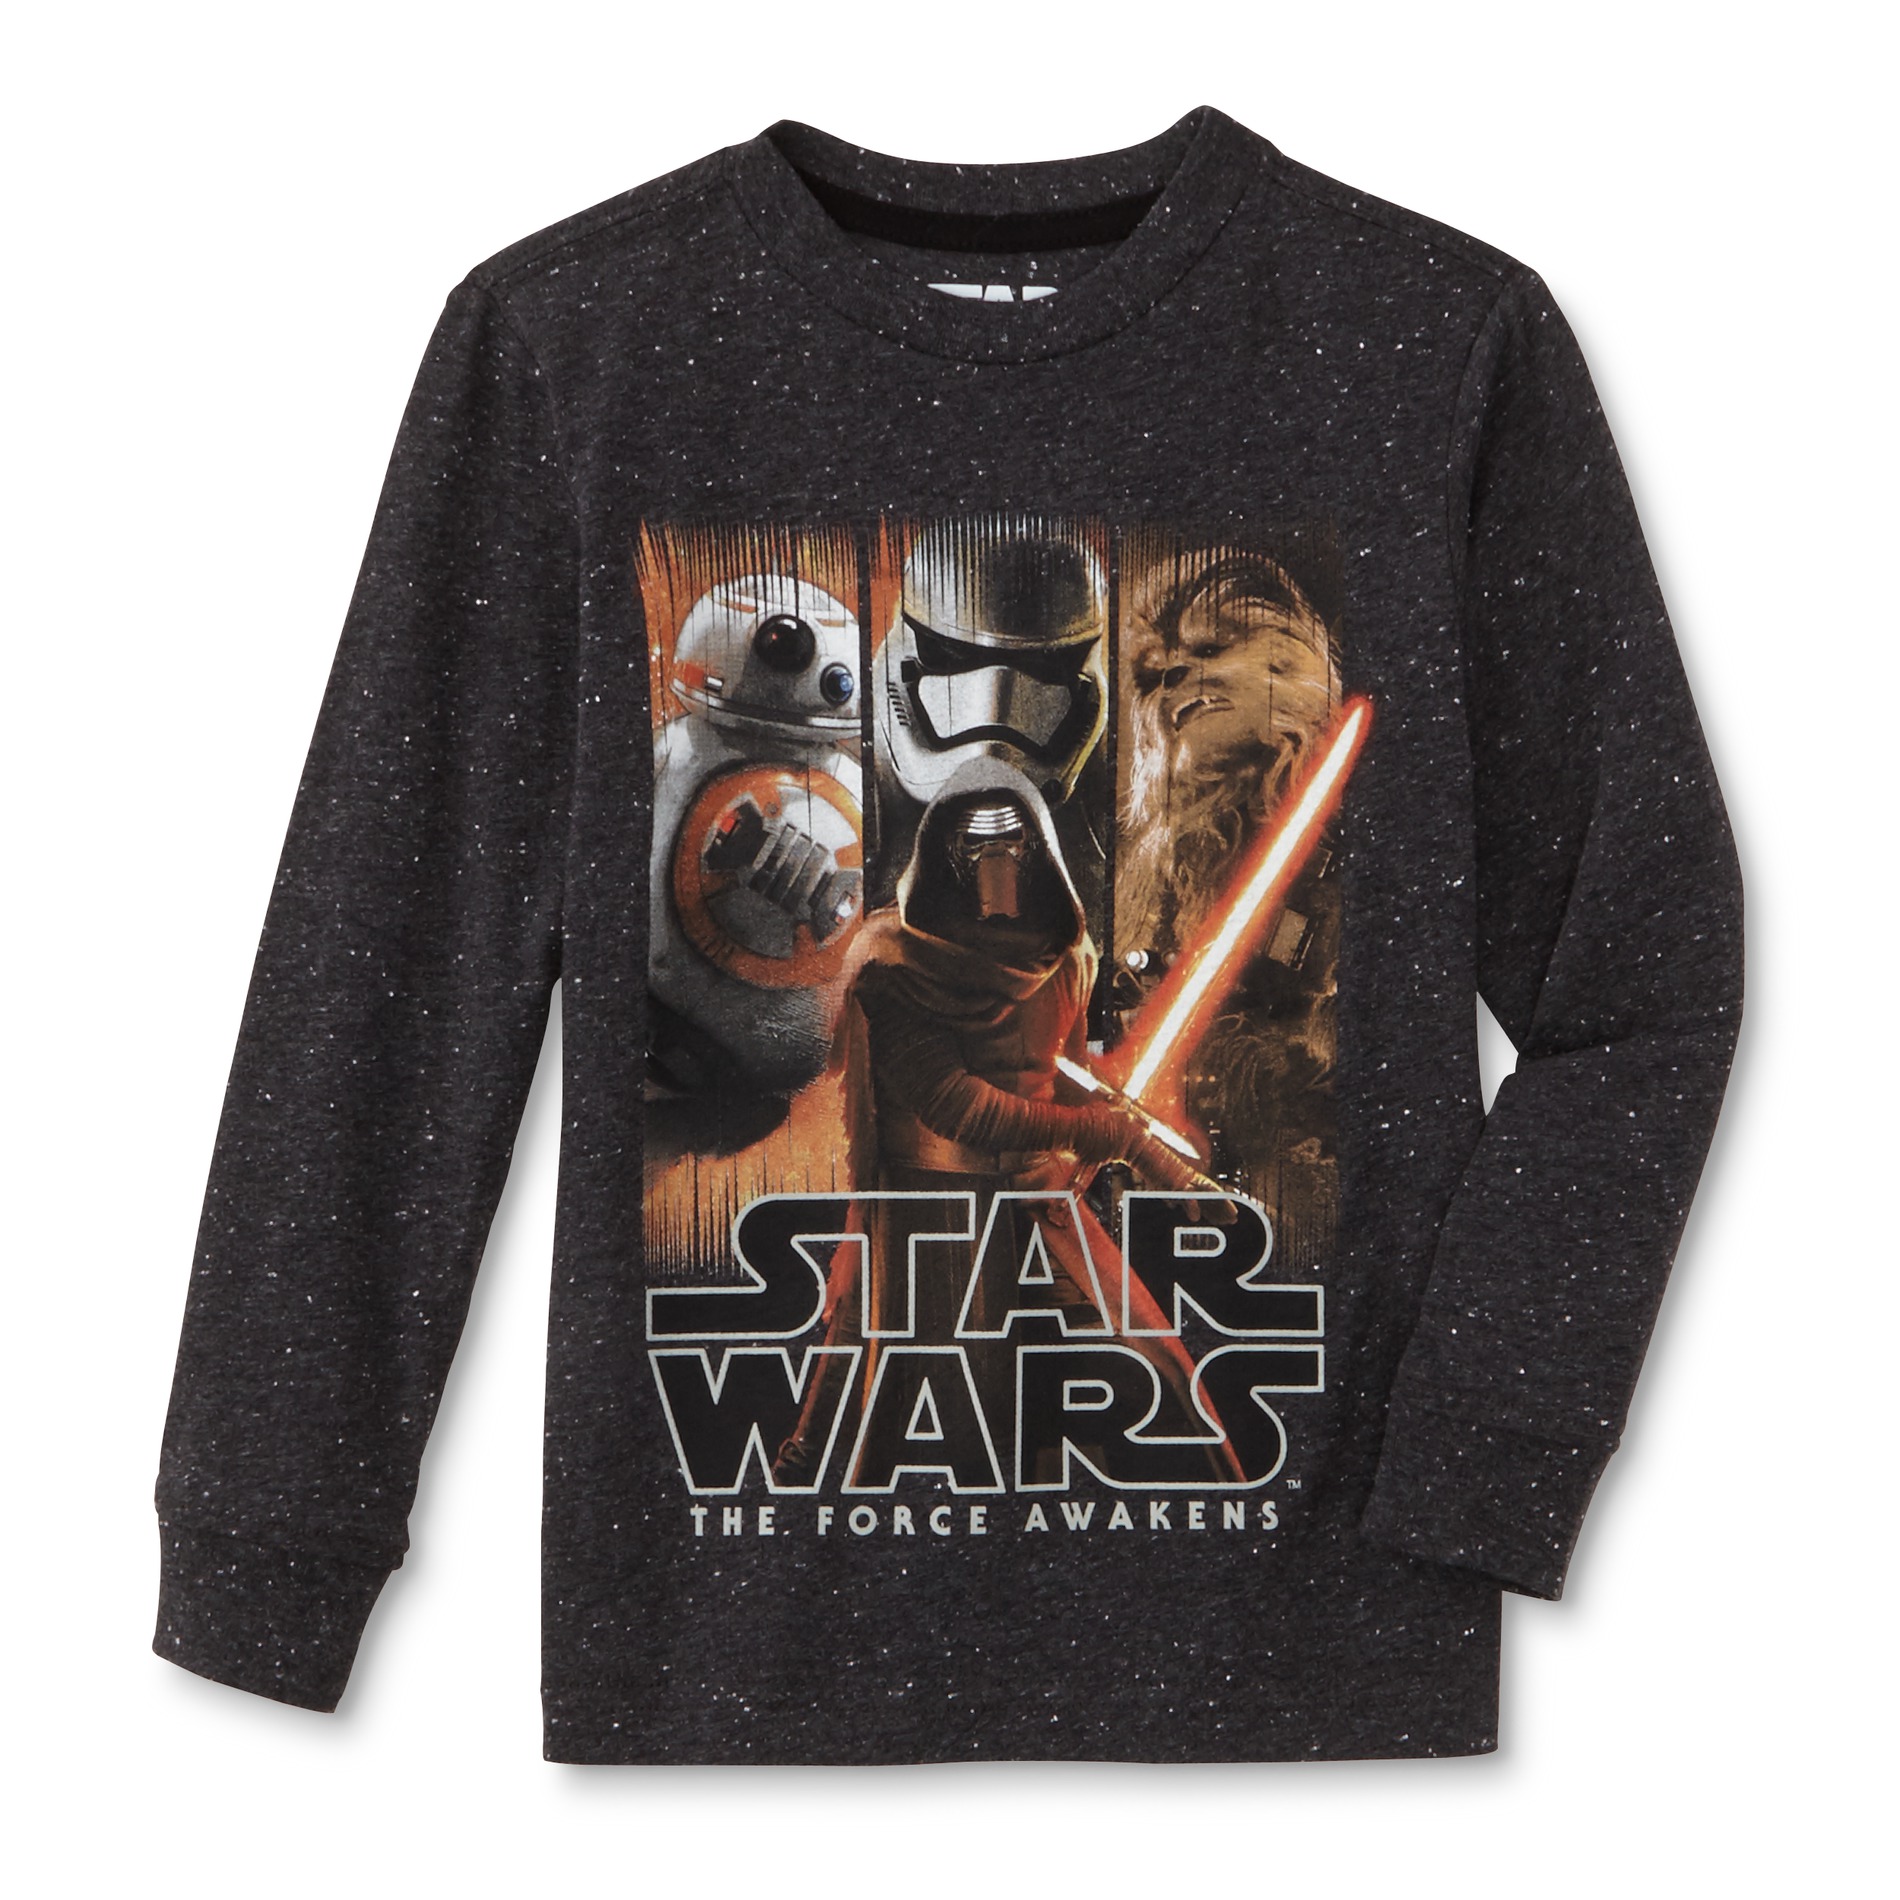 Lucasfilm Star Wars: The Force Awakens Boys' Graphic T-Shirt